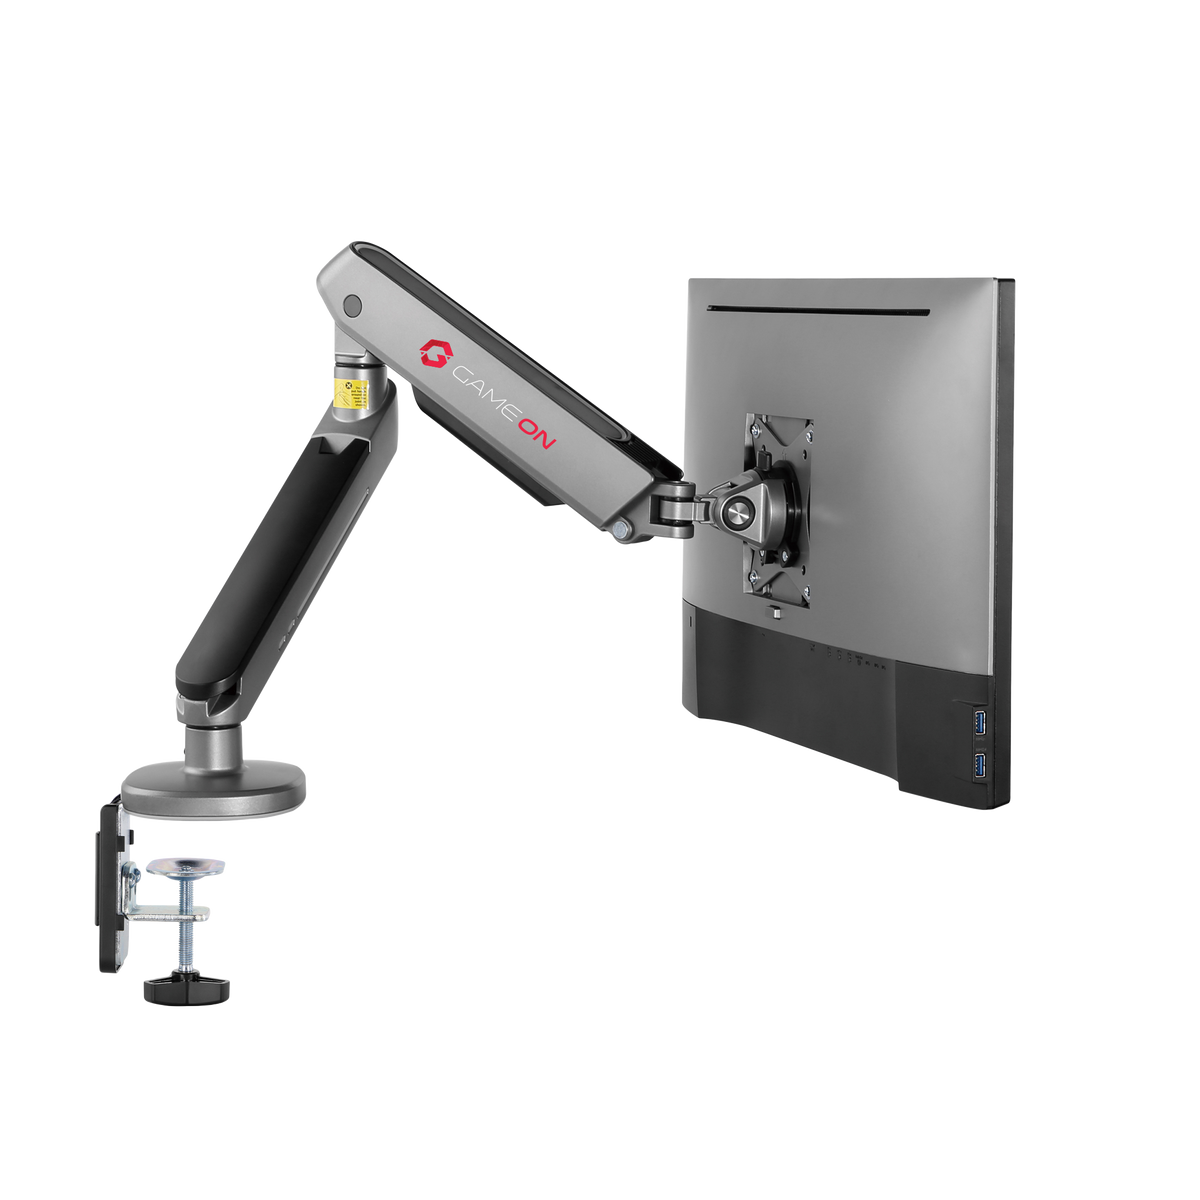 GAMEON GO-2168 PRO V2 Single Monitor Arm, Stand And Mount For Gaming And Office Use, 17" - 32", With RGB Lighting, Each Arm Up To 9 KG, Space Grey